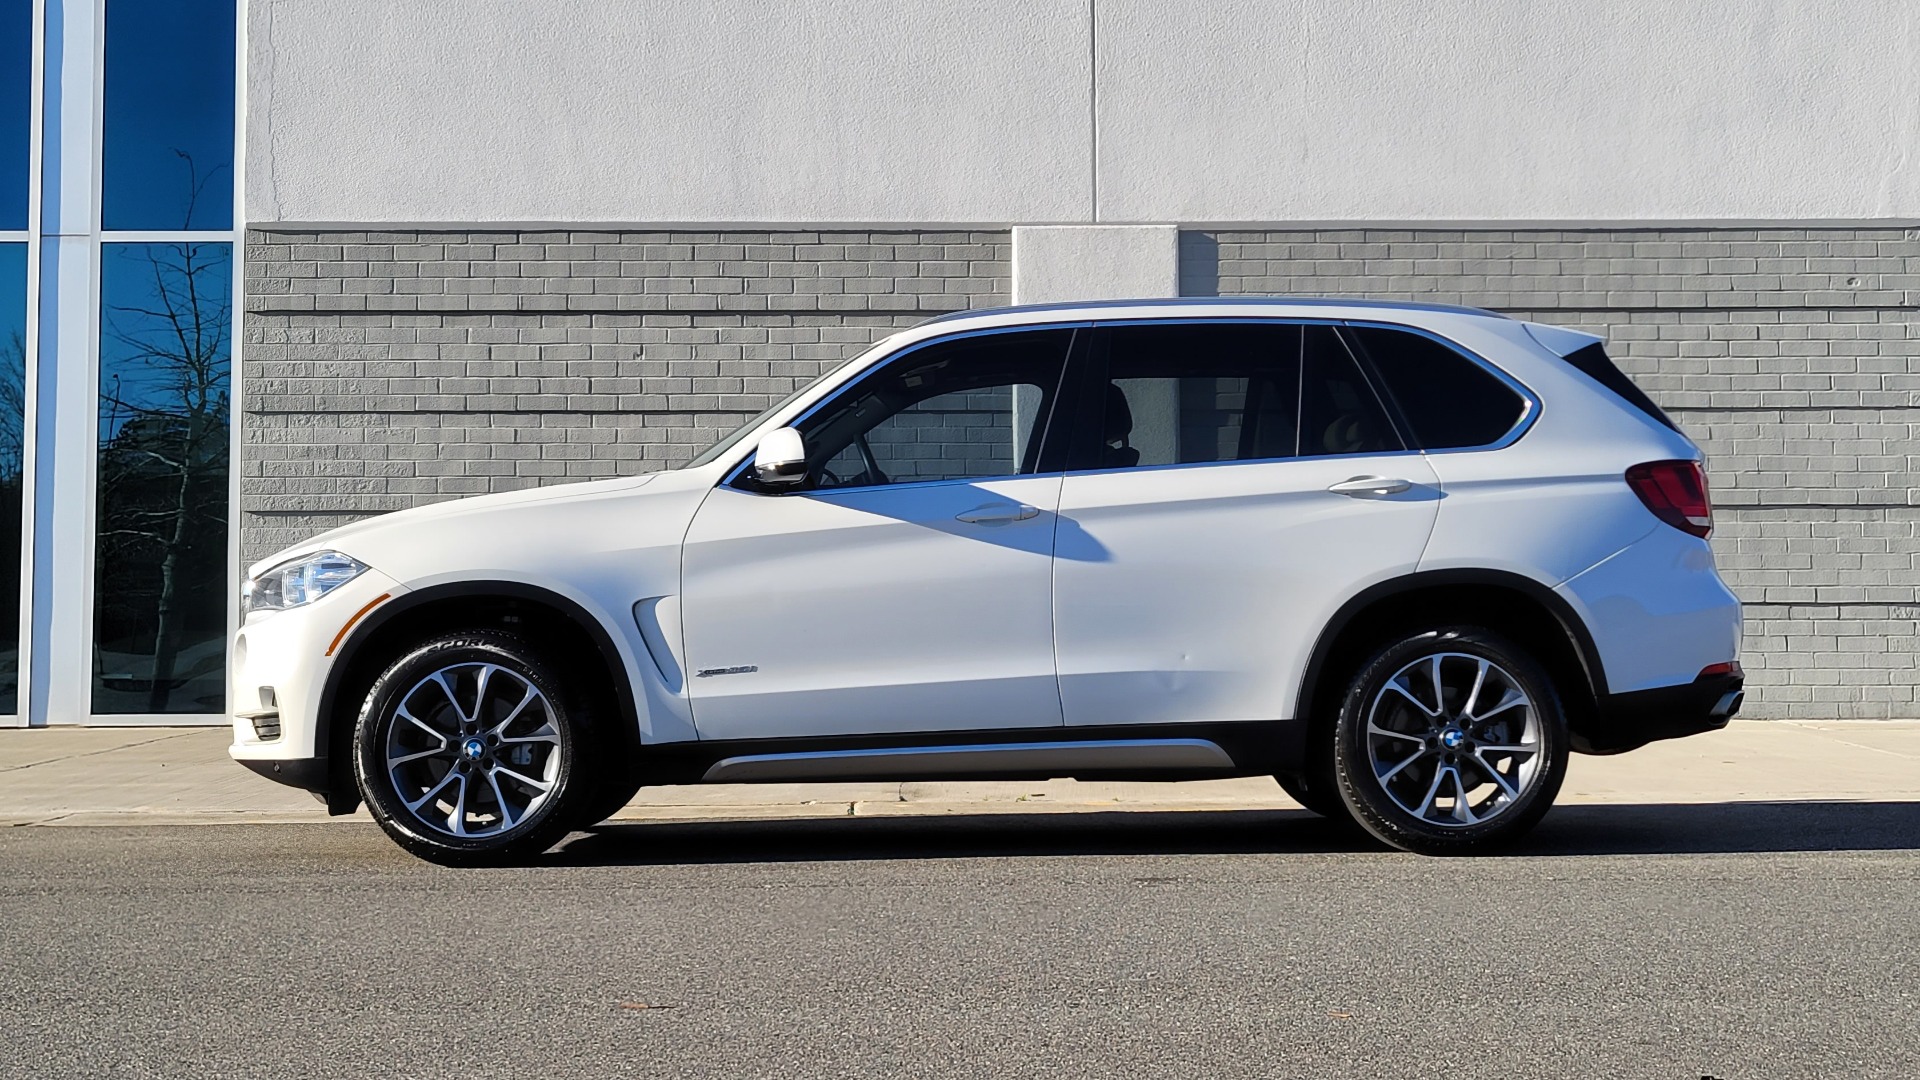 Used 2018 BMW X5 XDRIVE35I PREMIUM / DRVR ASST / HUD / WIRELESS CHARGING / HEATED SEATS for sale $41,995 at Formula Imports in Charlotte NC 28227 4